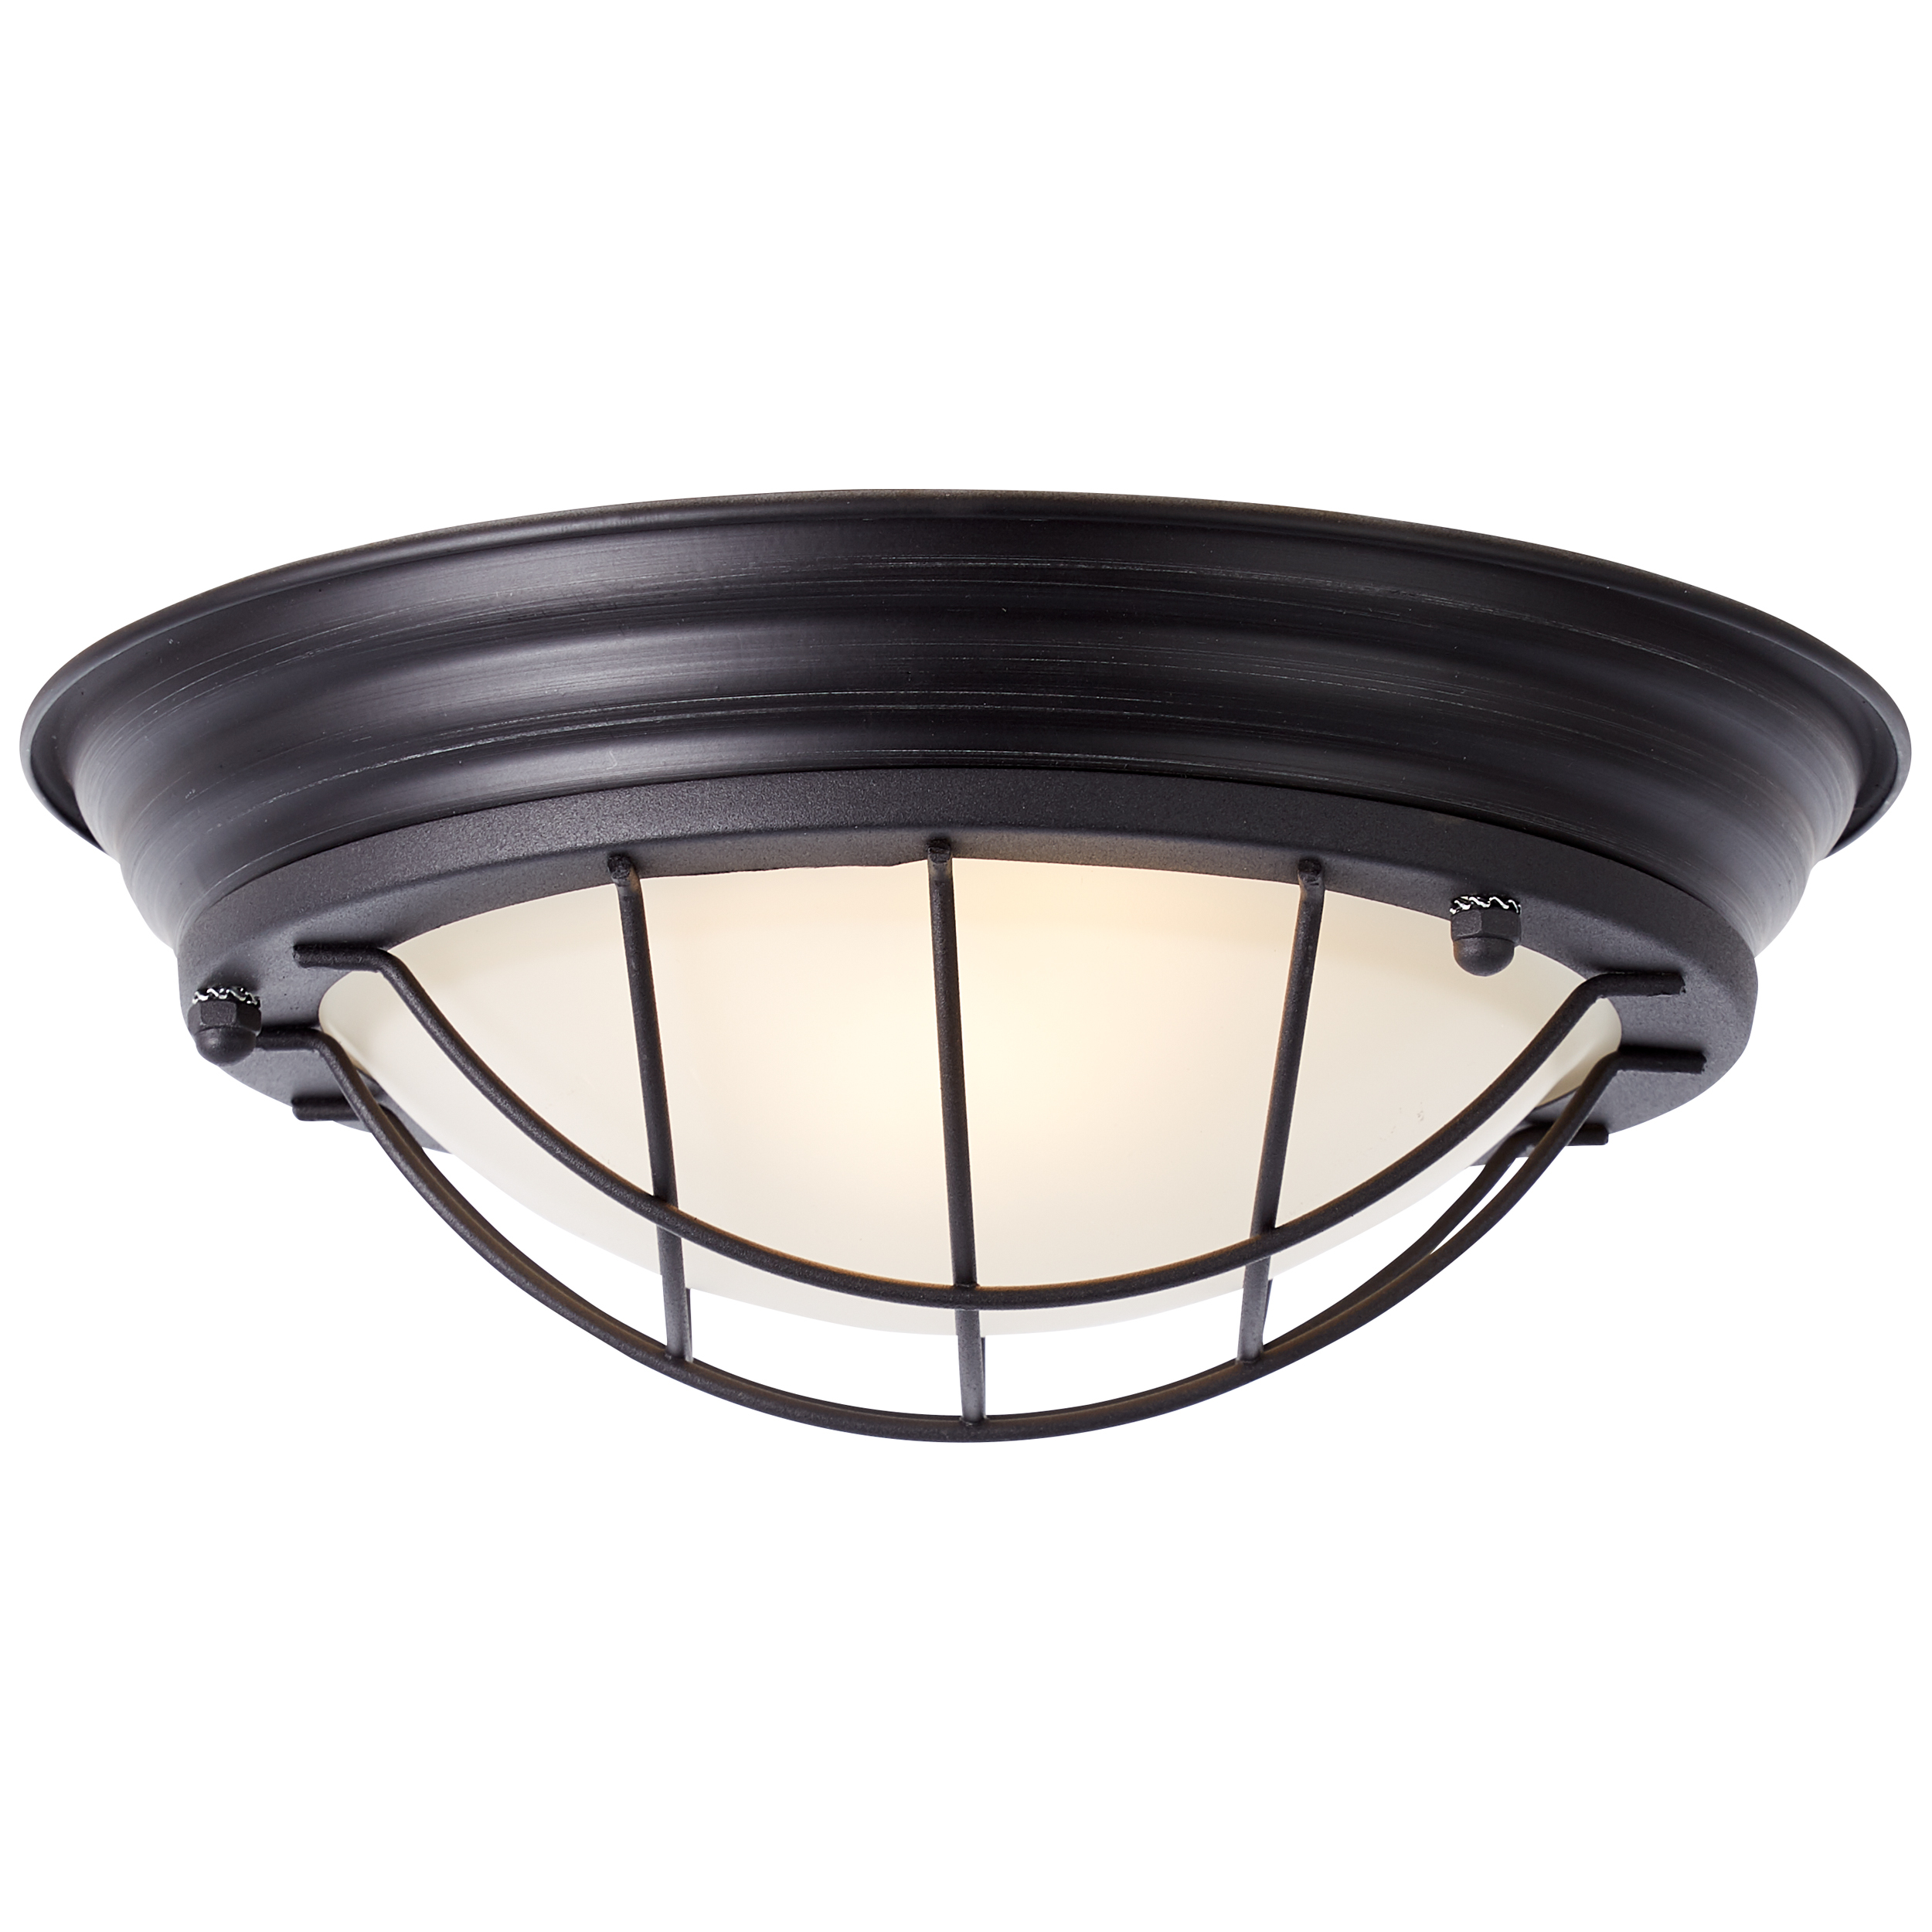 Typhoon wall and ceiling light 29cm black